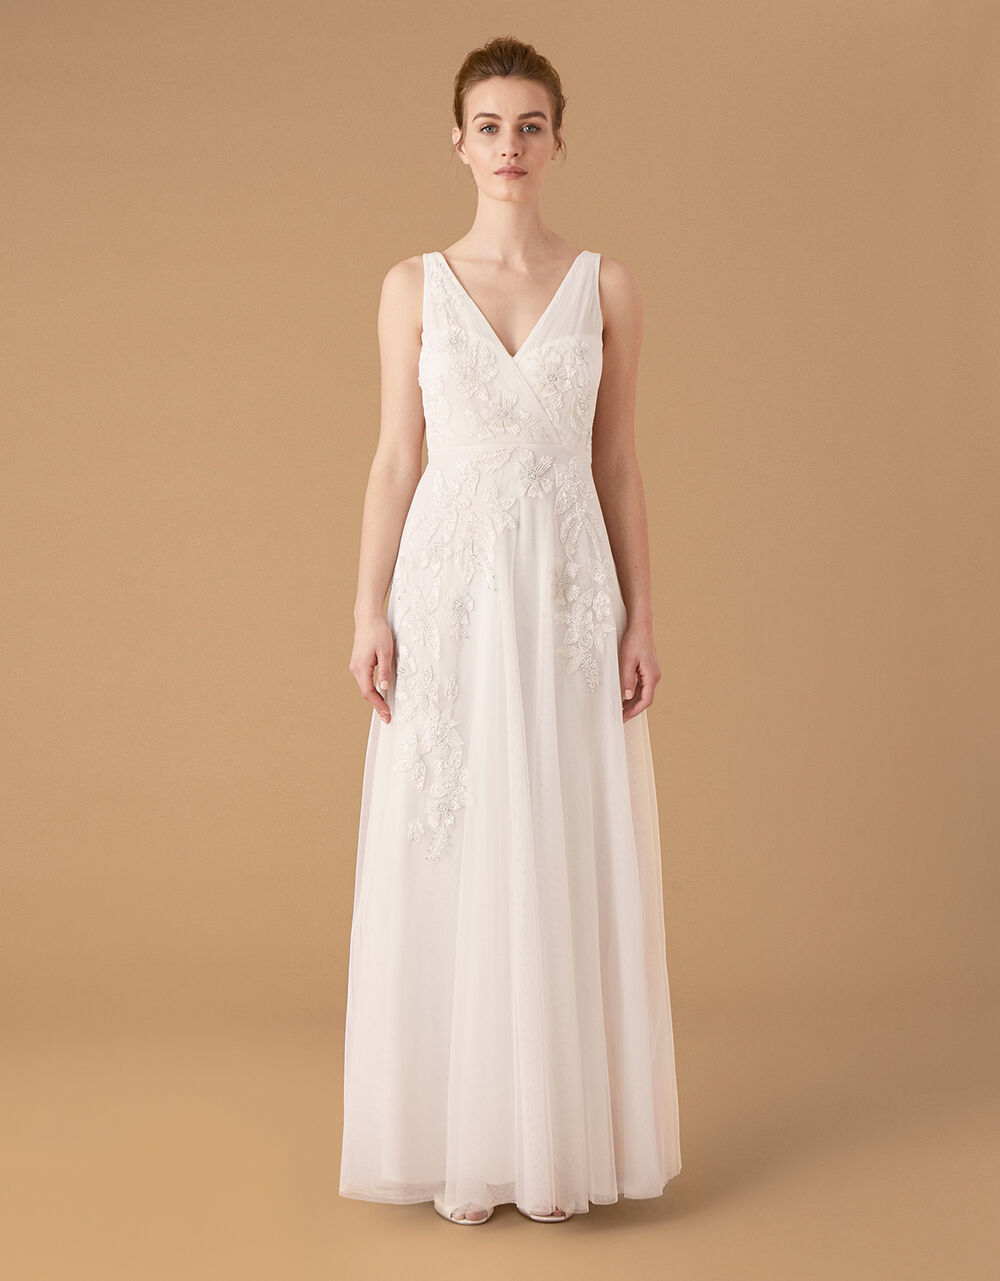 Wedding The Bride | Lucy Floral Embroidered Bridal Dress Ivory - QA75654